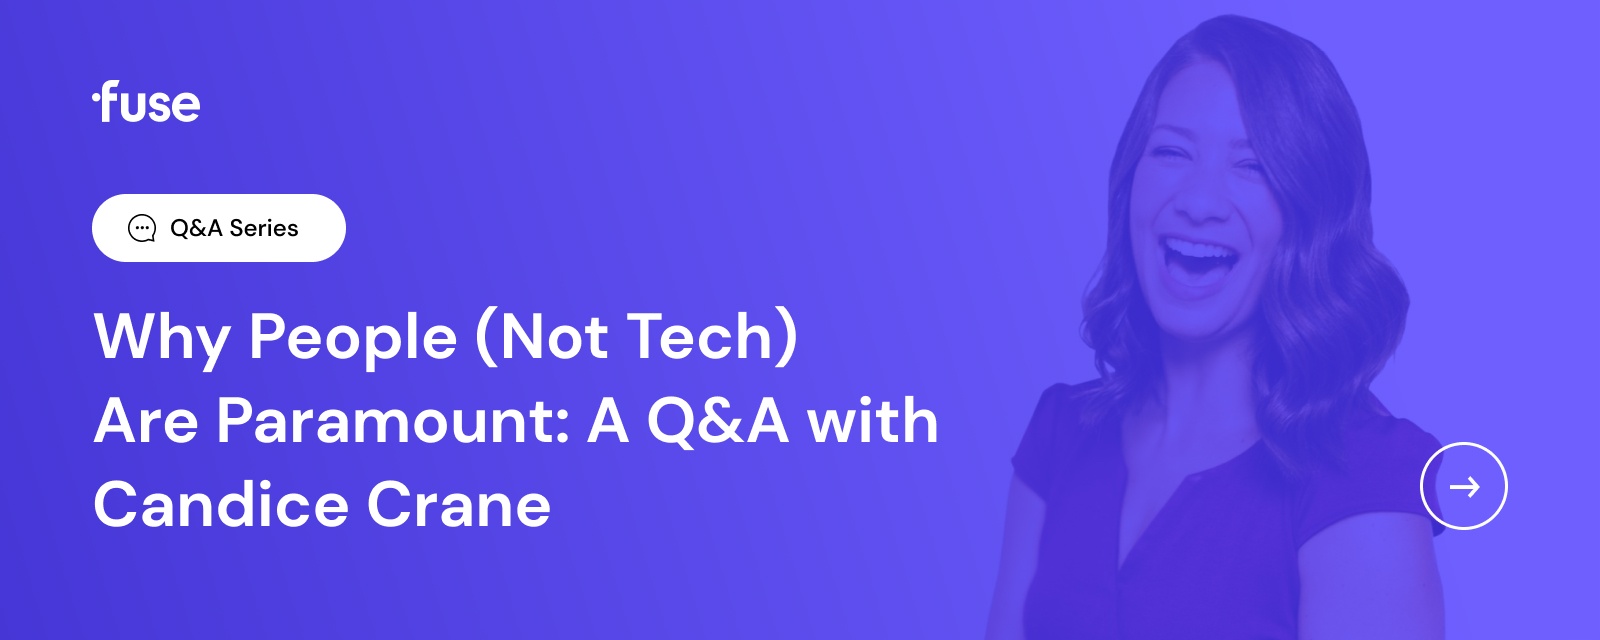 Related Read: Why People (Not Tech) Are Paramount: A Q&A with Candice Crane